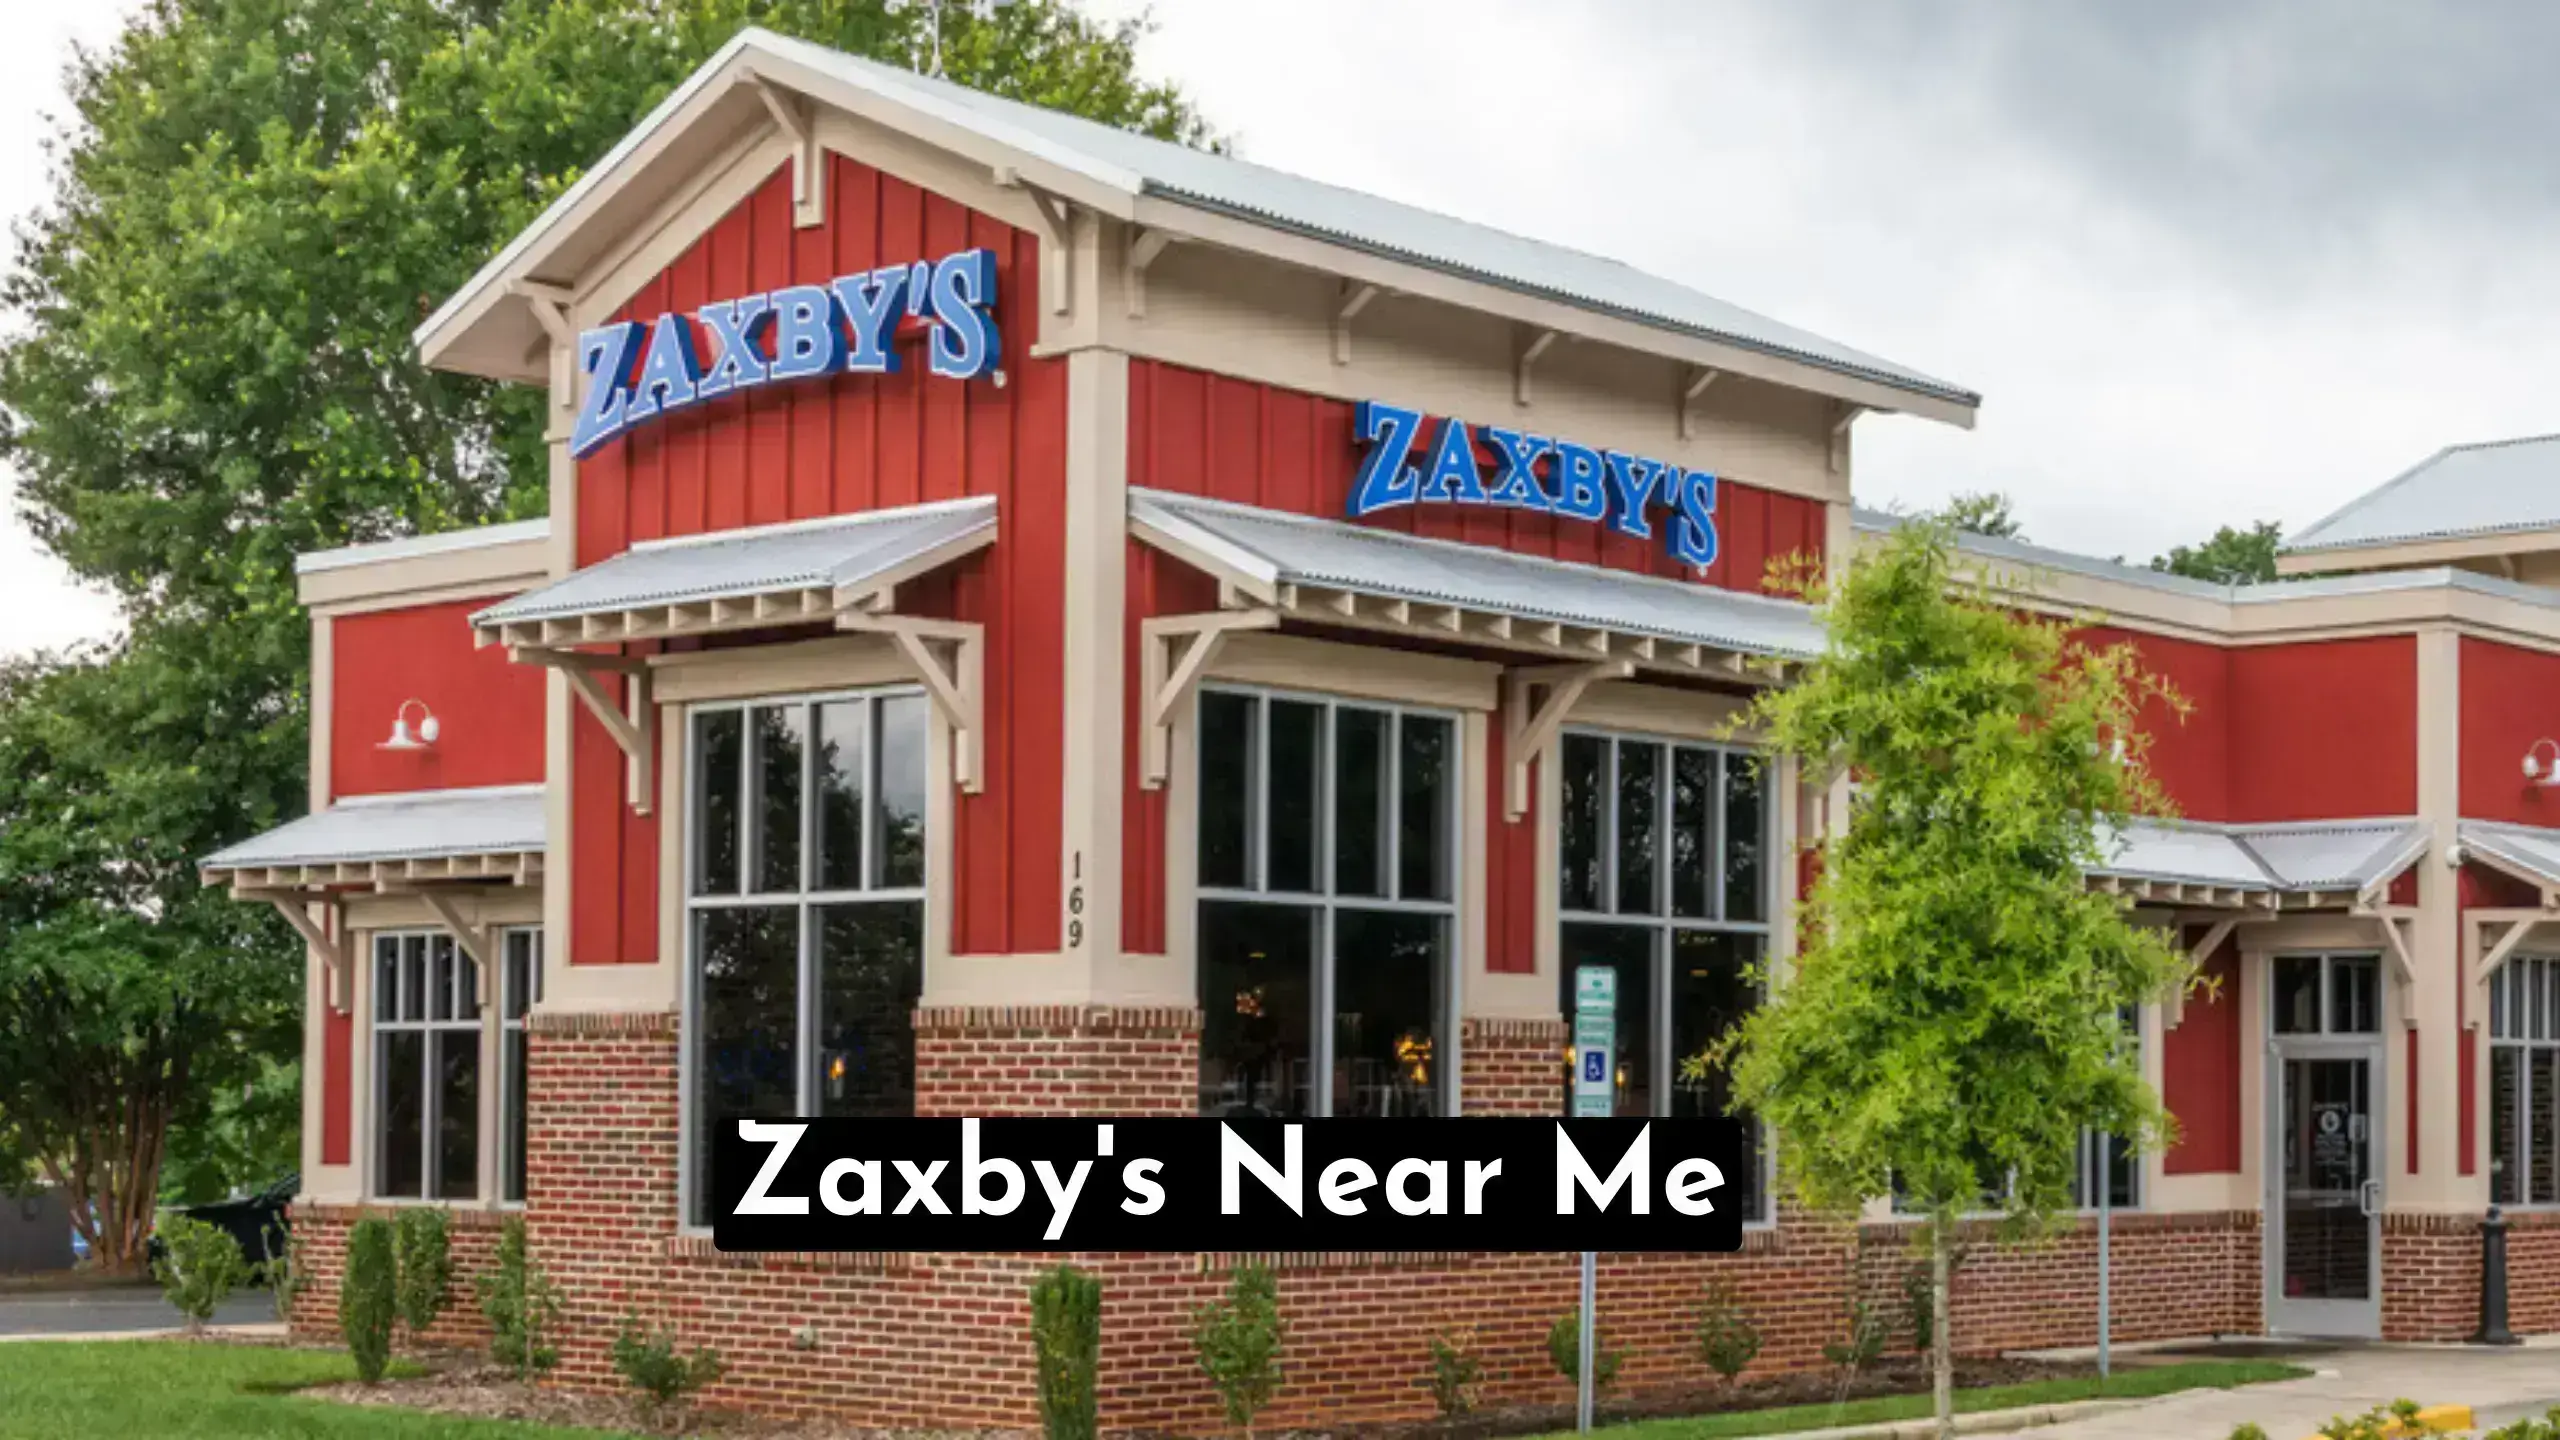 Looking for Zaxby's near you? Look no further! Find the closest Zaxby's Near me location to satisfy your cravings for delicious chicken Meals